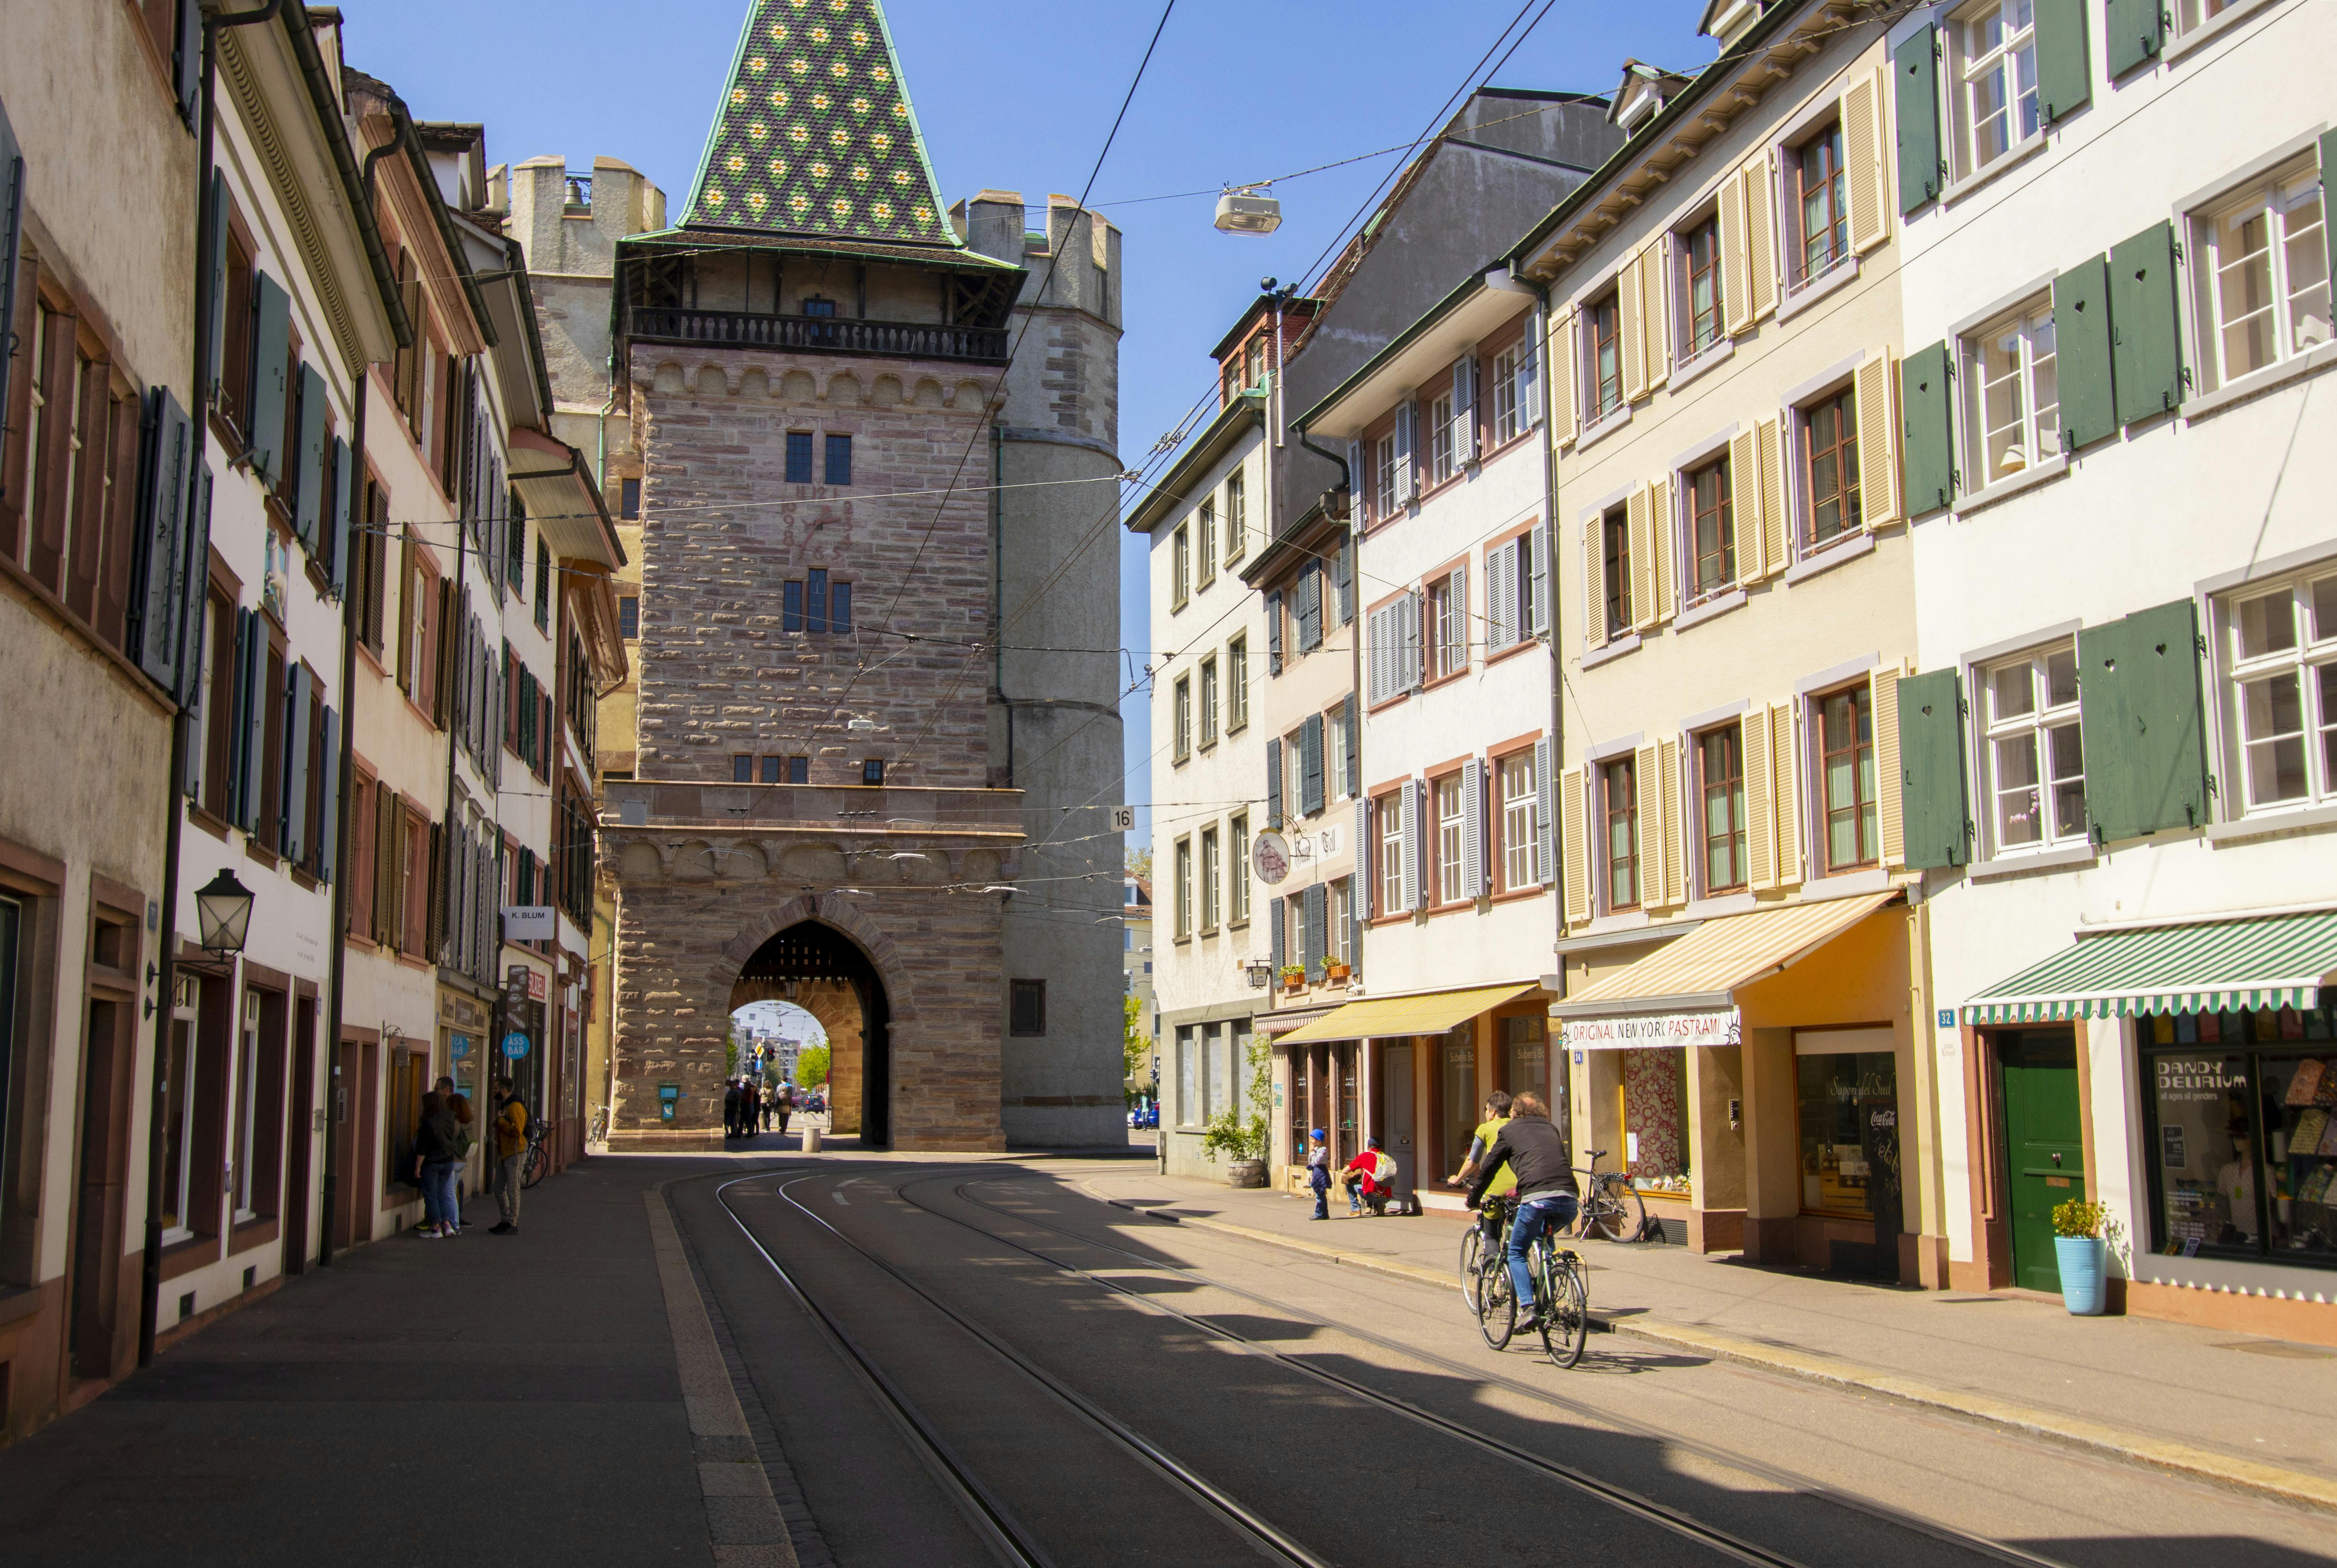 Explore Basel in 1 hour with a local